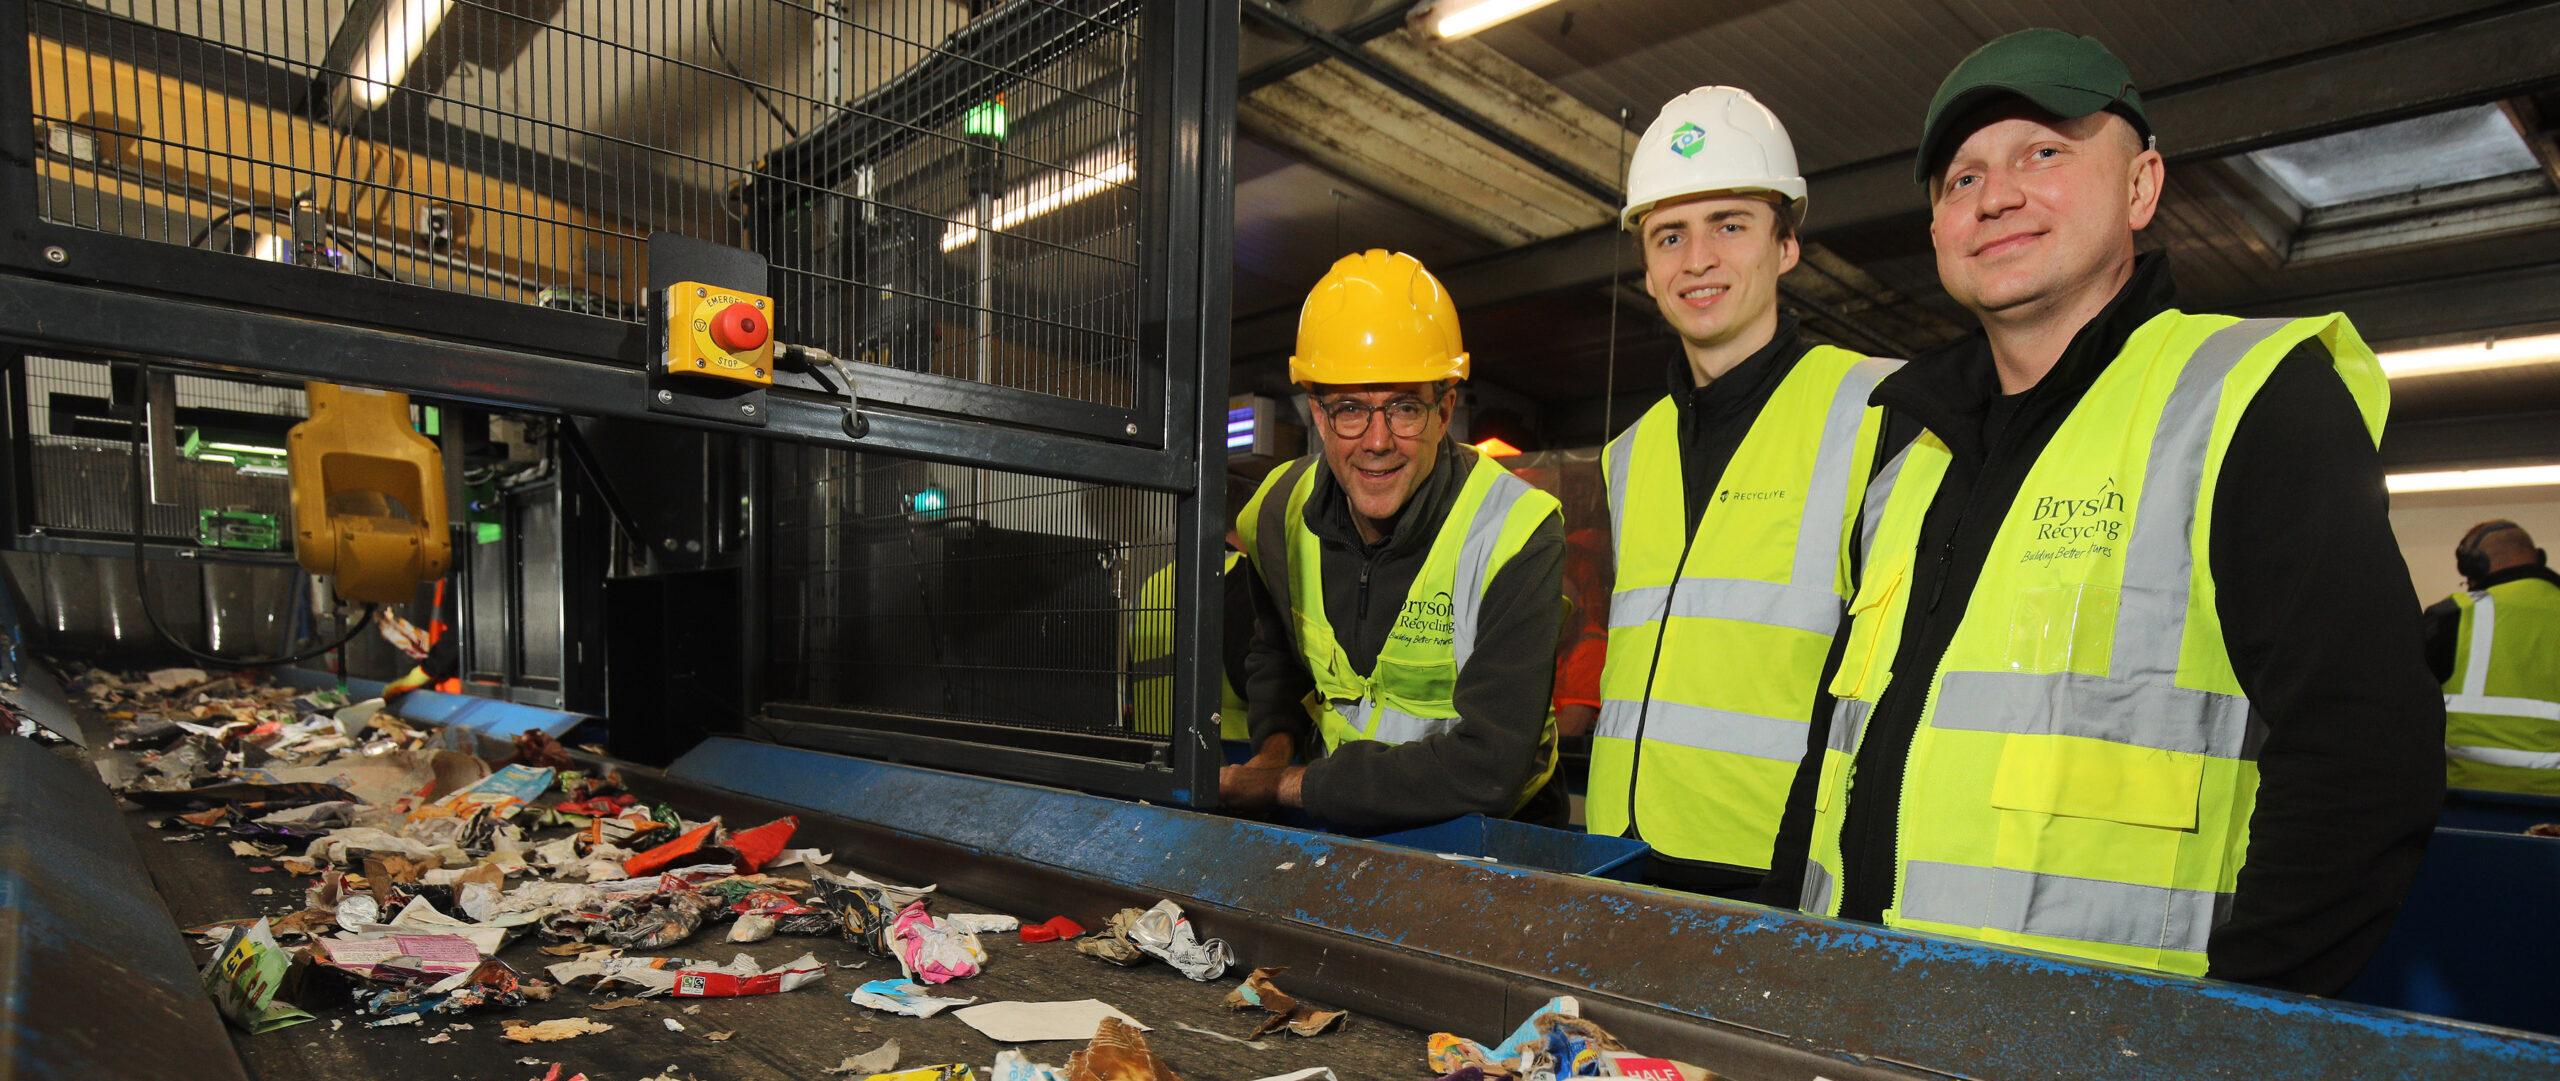 Product Bryson Recycling automates with Recycleye Robotics - Recycleye image